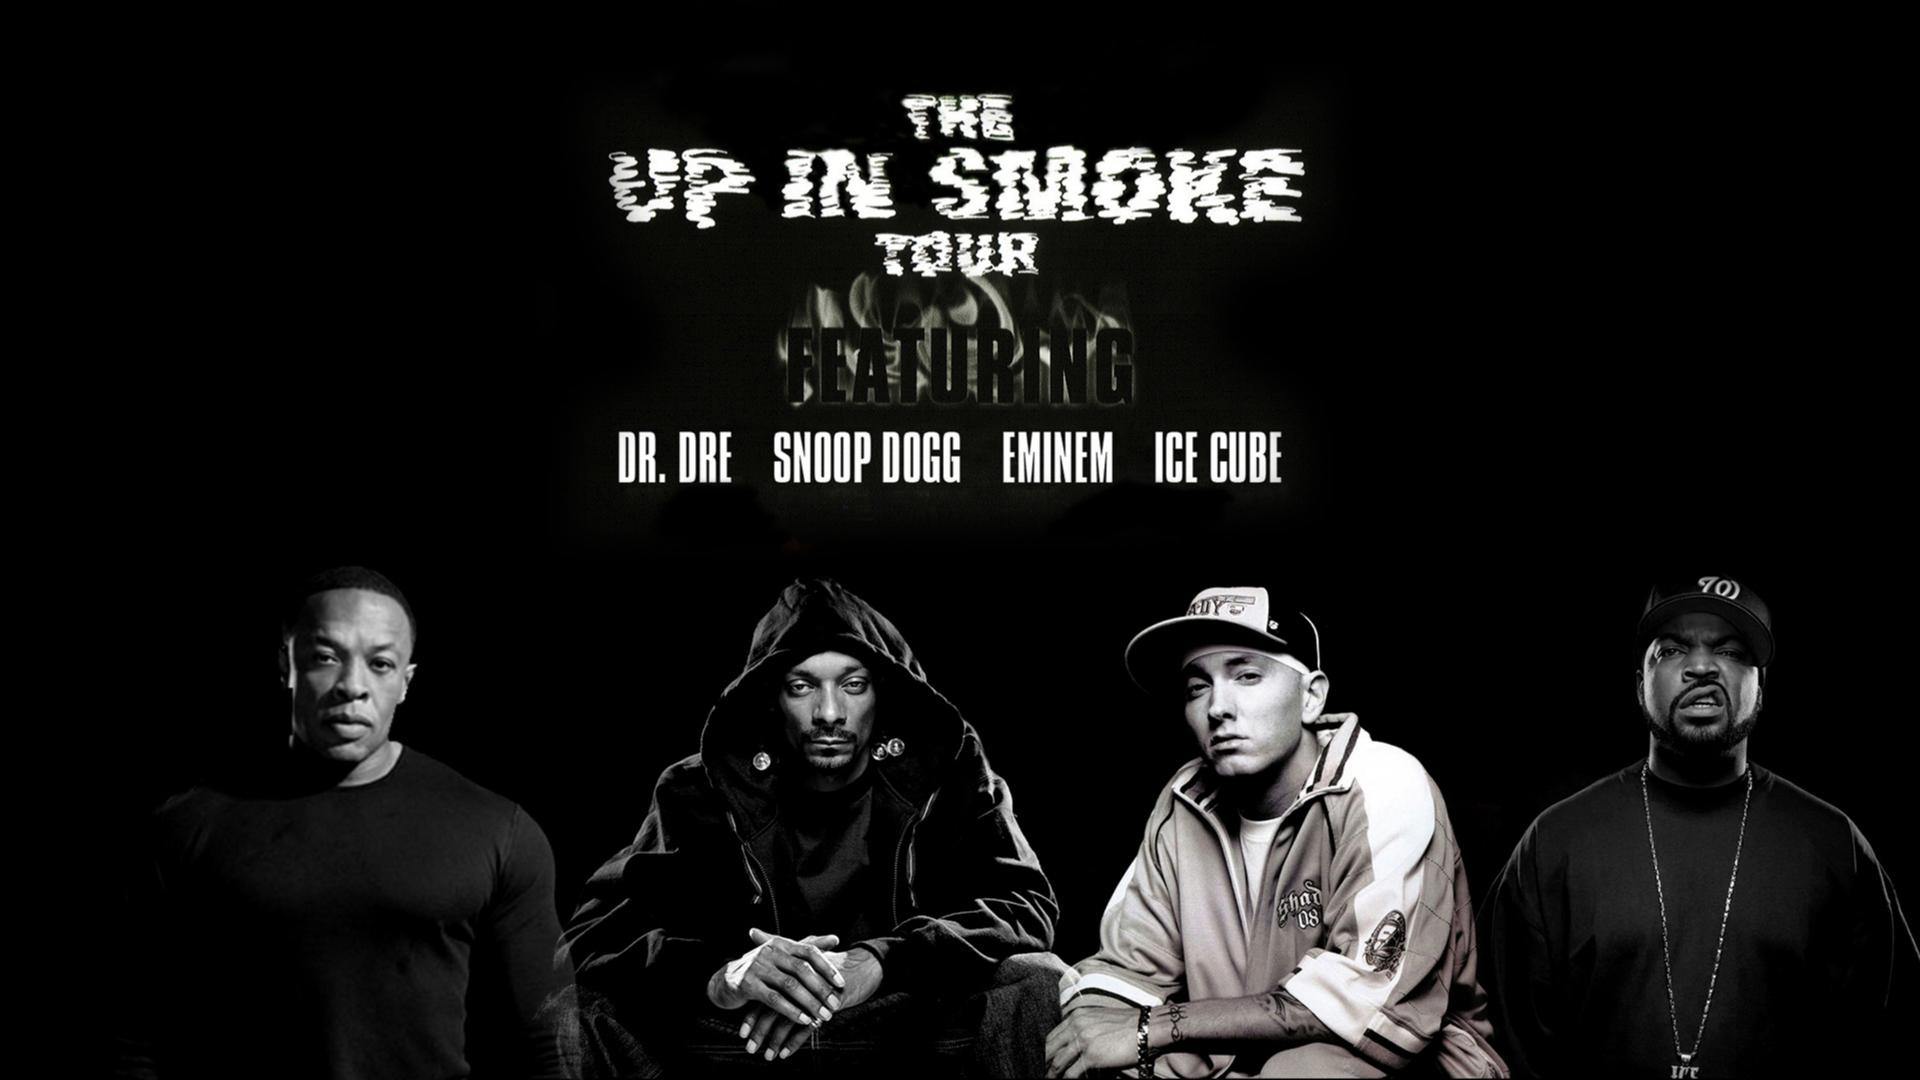 up in smoke tour tracklist